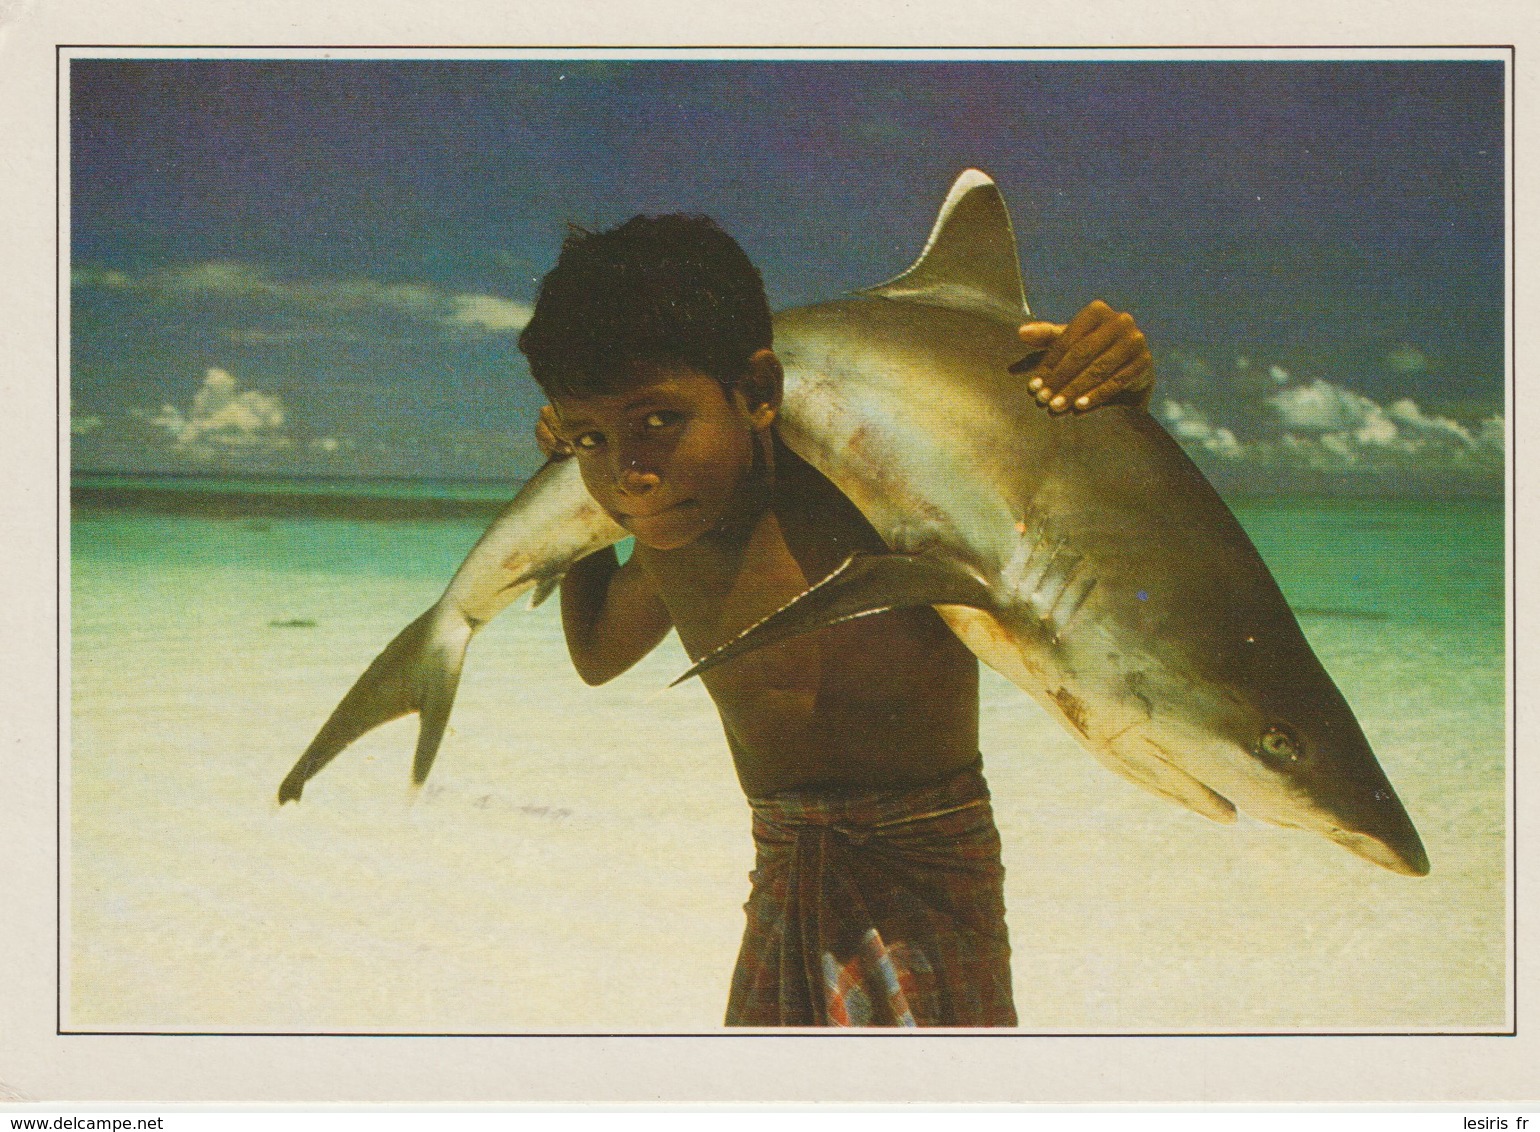 CP - PHOTO - MALEDIVEN XV - THE MALDIVES - WHITE TIPPED SHARK CARRIED BY A YOUNG CHILD - EDITO SERVICE - 1989 - 1990 - Maldives